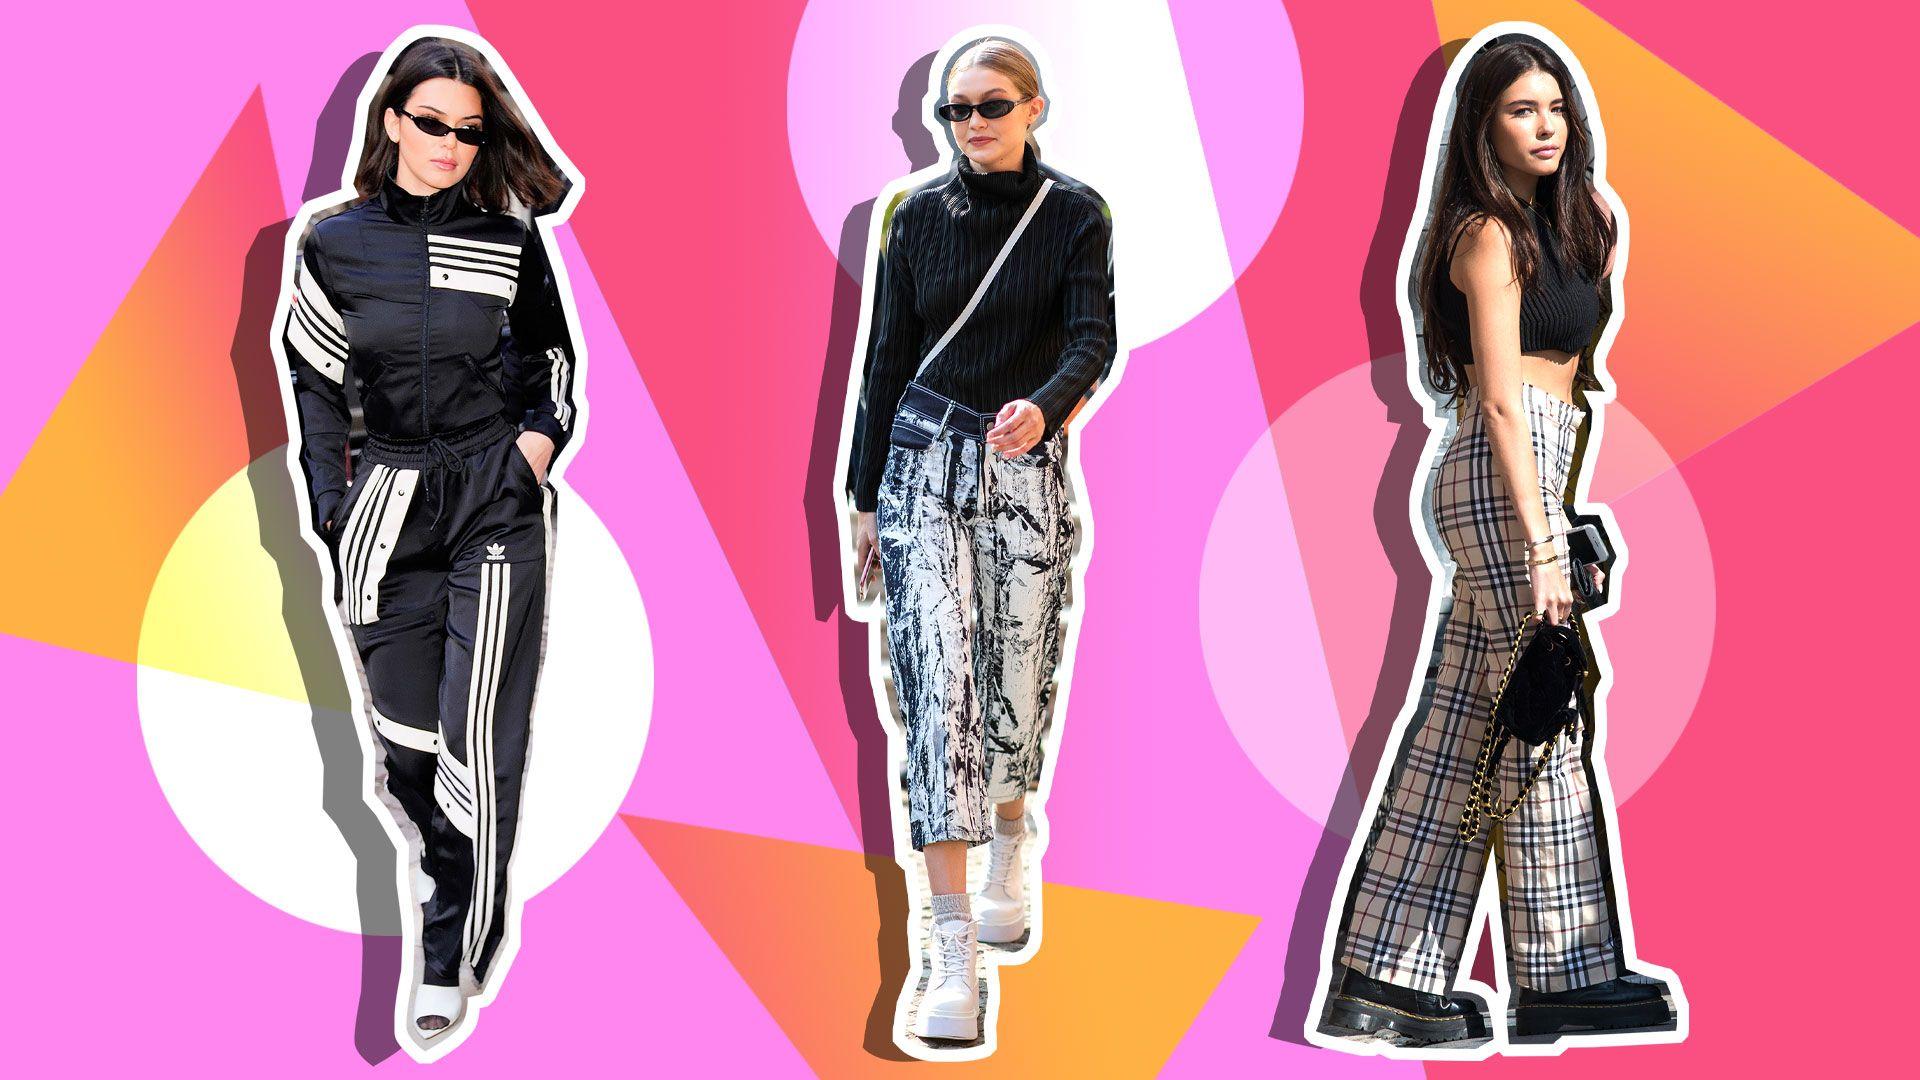 From 90 S Clothing and Apparel Logo - Celebs Who Wore '90s Fashion, Style Trends in 2018